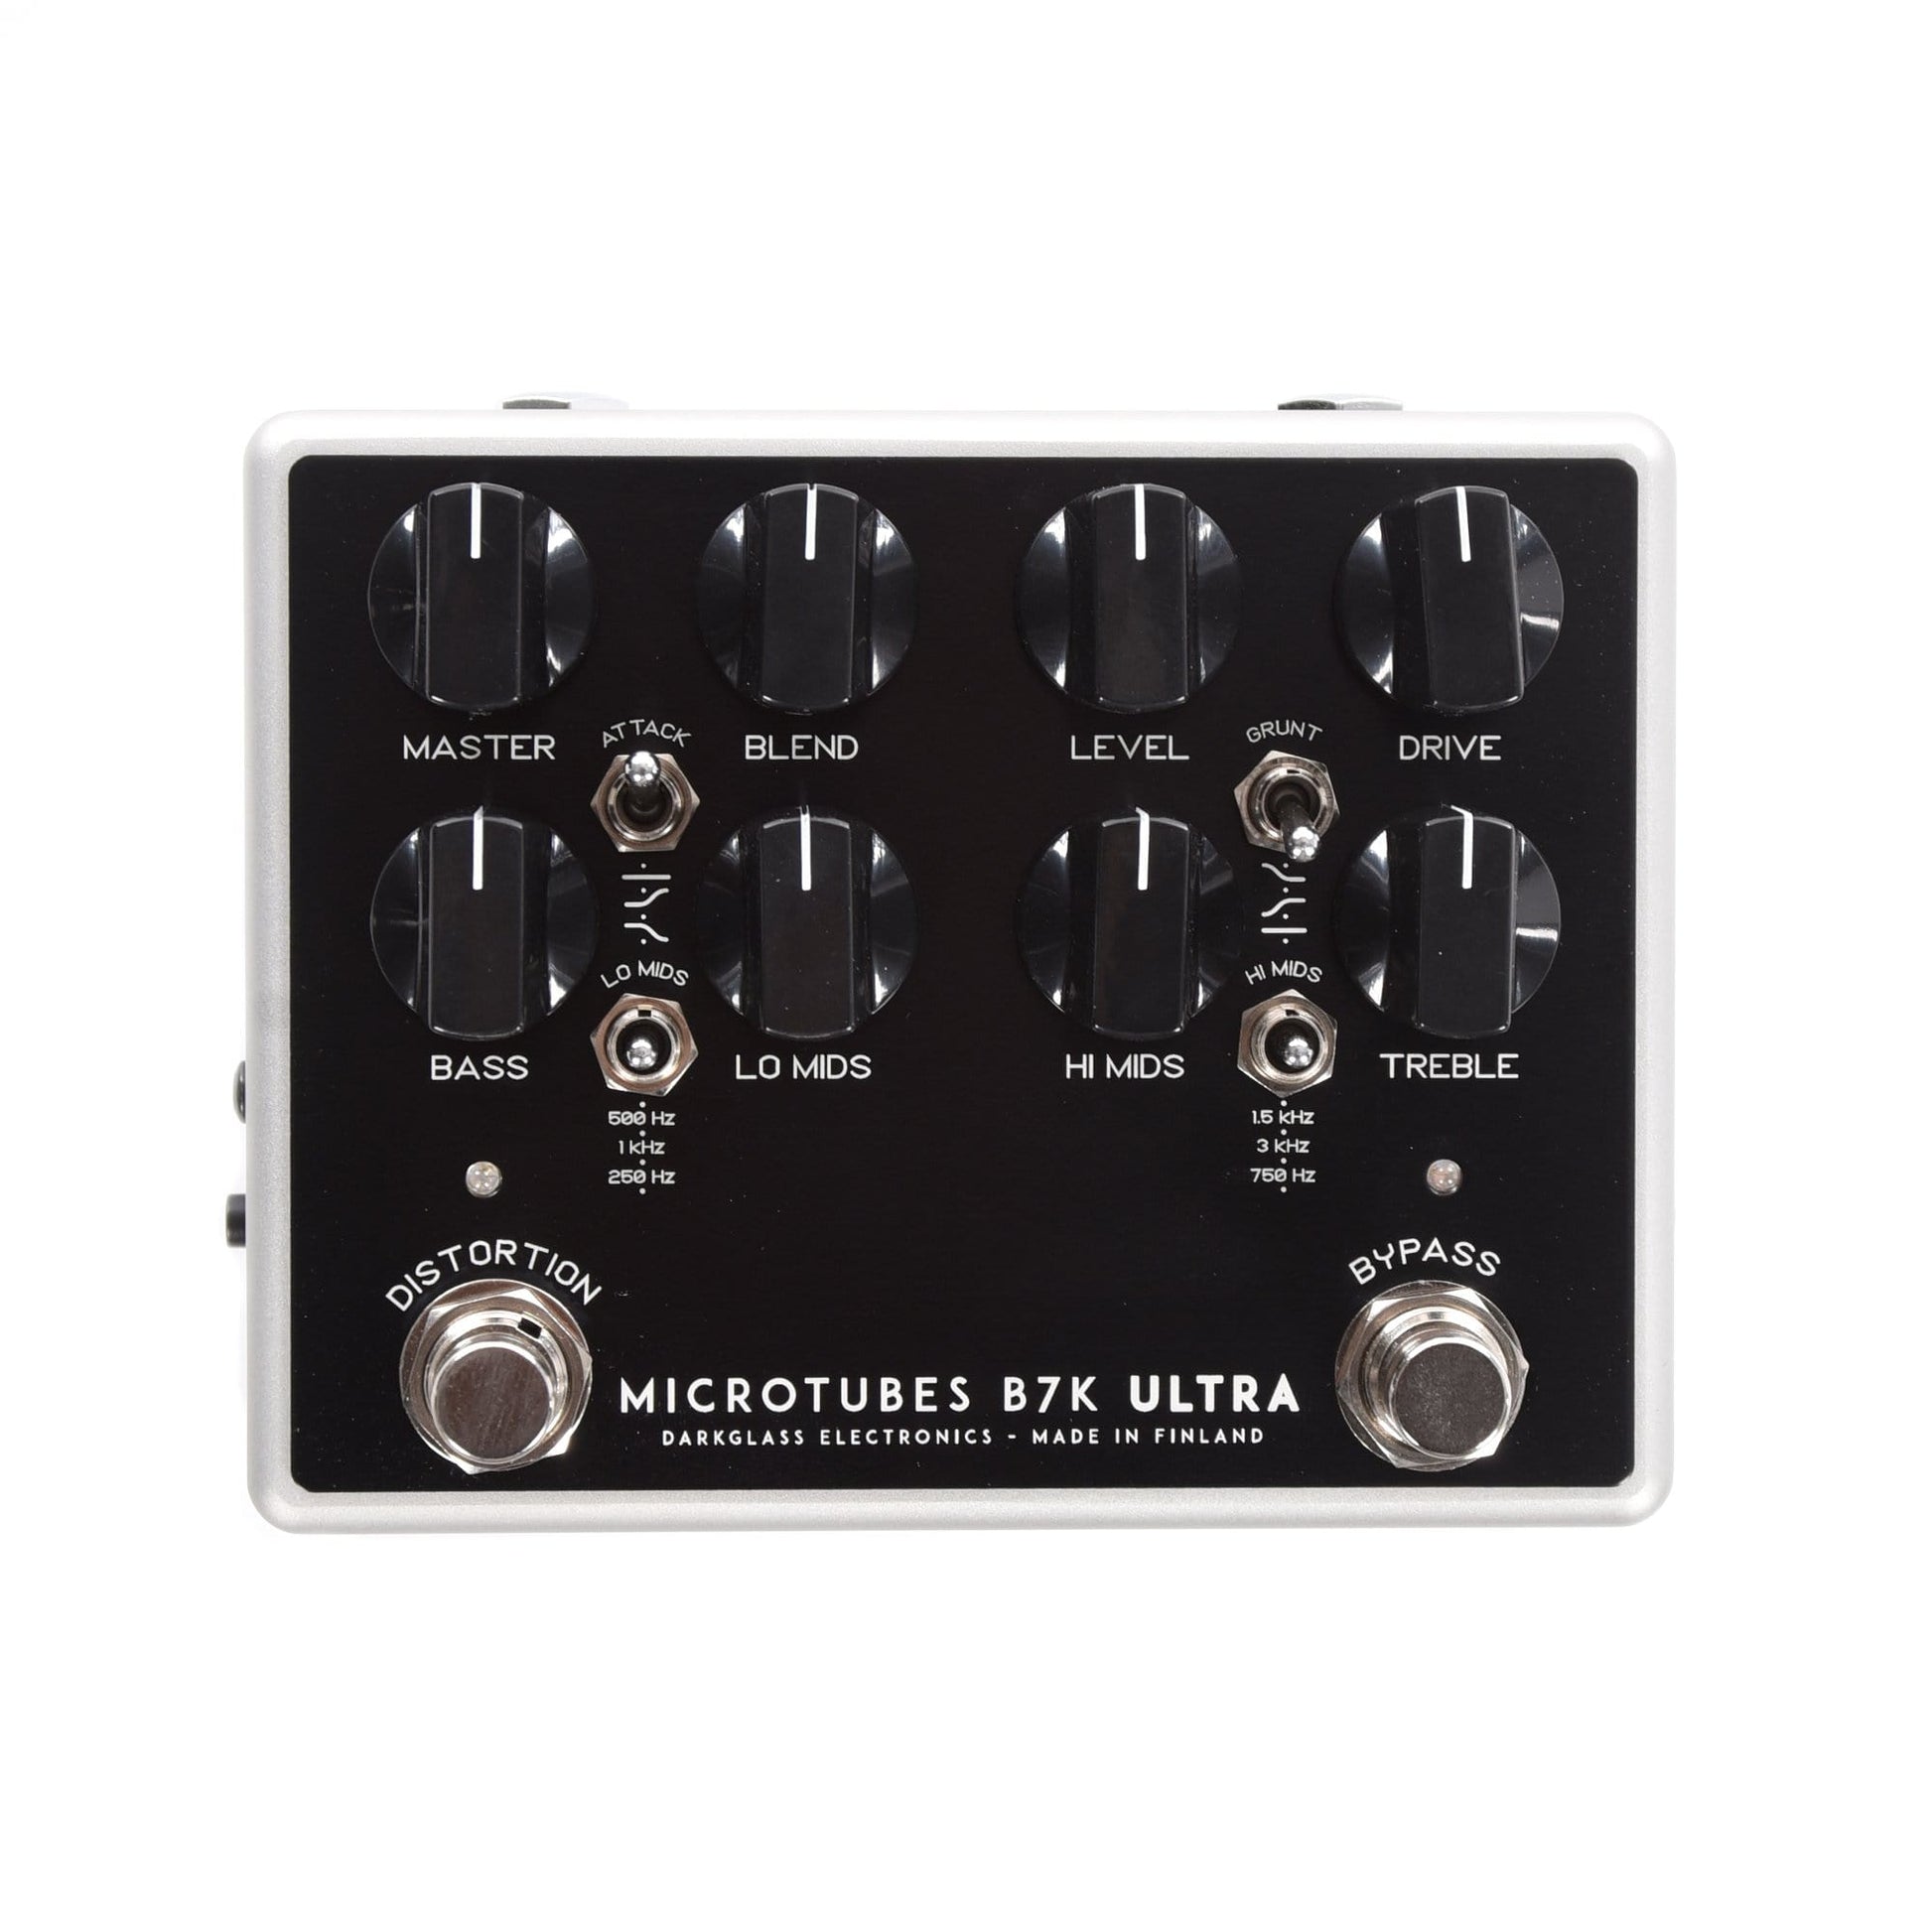 Darkglass Electronics Microtubes B7K Ultra V2 Bass Preamp Pedal w/ Aux In Effects and Pedals / Bass Pedals